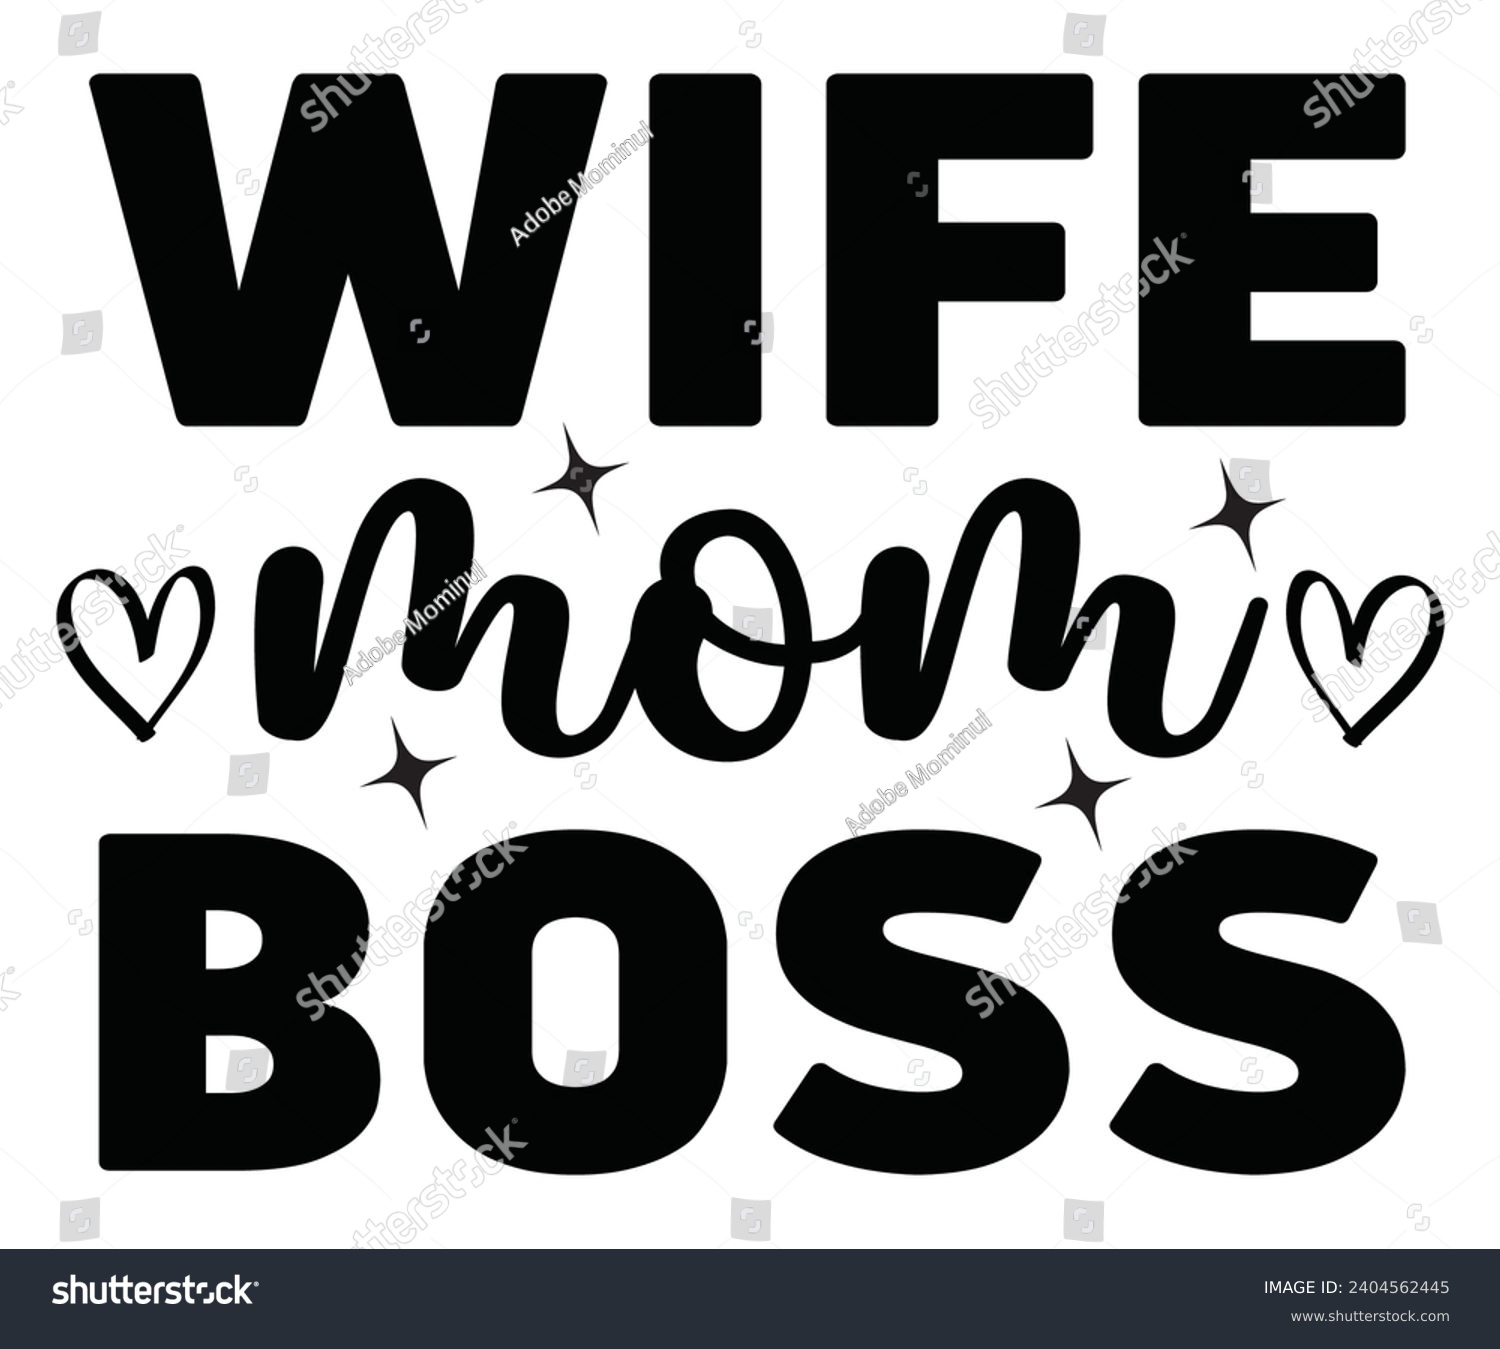 SVG of Wife Mom Boss Svg,Happy Boss Day svg,Boss Saying Quotes,Boss Day T-shirt,Gift for Boss,Great Jobs,Happy Bosses Day t-shirt,Girl Boss Shirt,Motivational Boss,Cut File,Circut And Silhouette,Commercial  svg